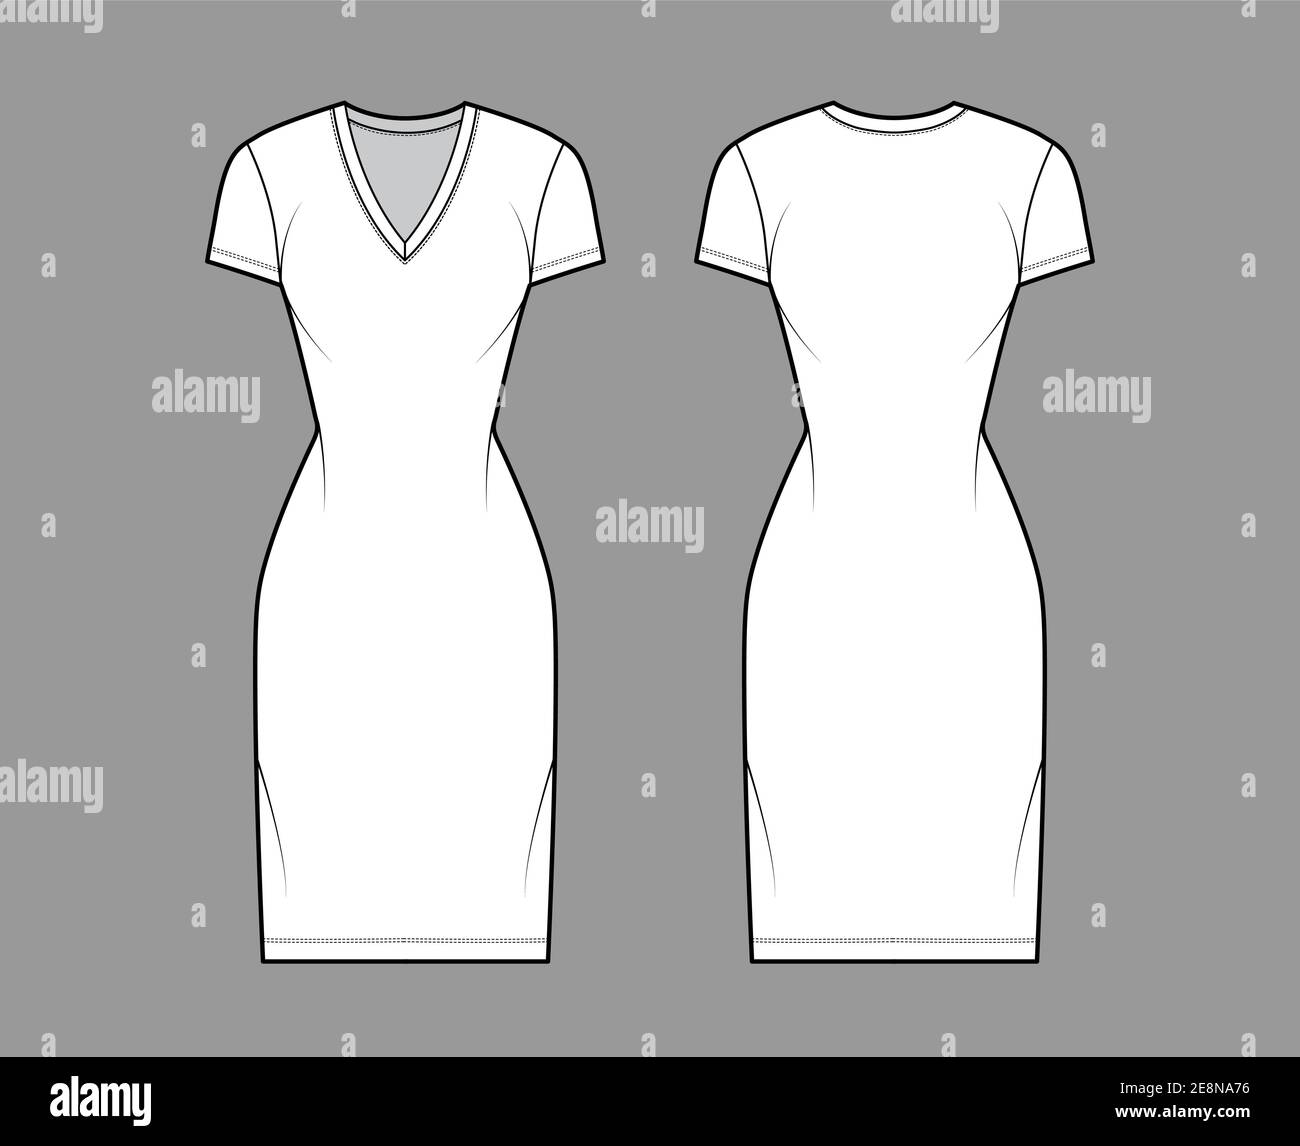 T-shirt dress technical fashion illustration with V-neck, short sleeves, knee length, fitted body, Pencil fullness. Flat apparel template front, back, white color. Women, men, unisex CAD mockup Stock Vector